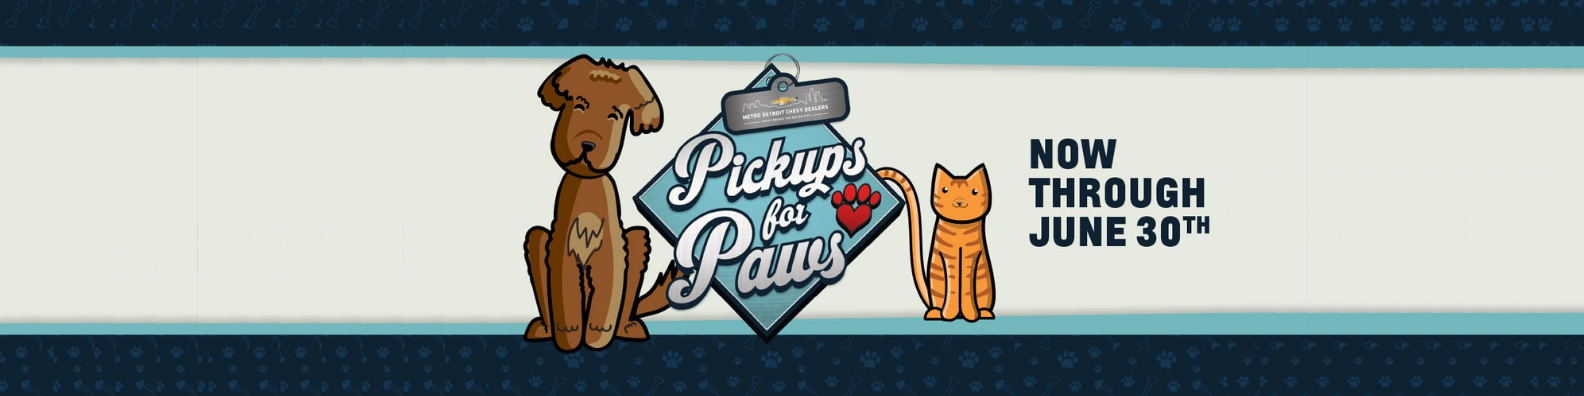 2022 pickups for paws campaign